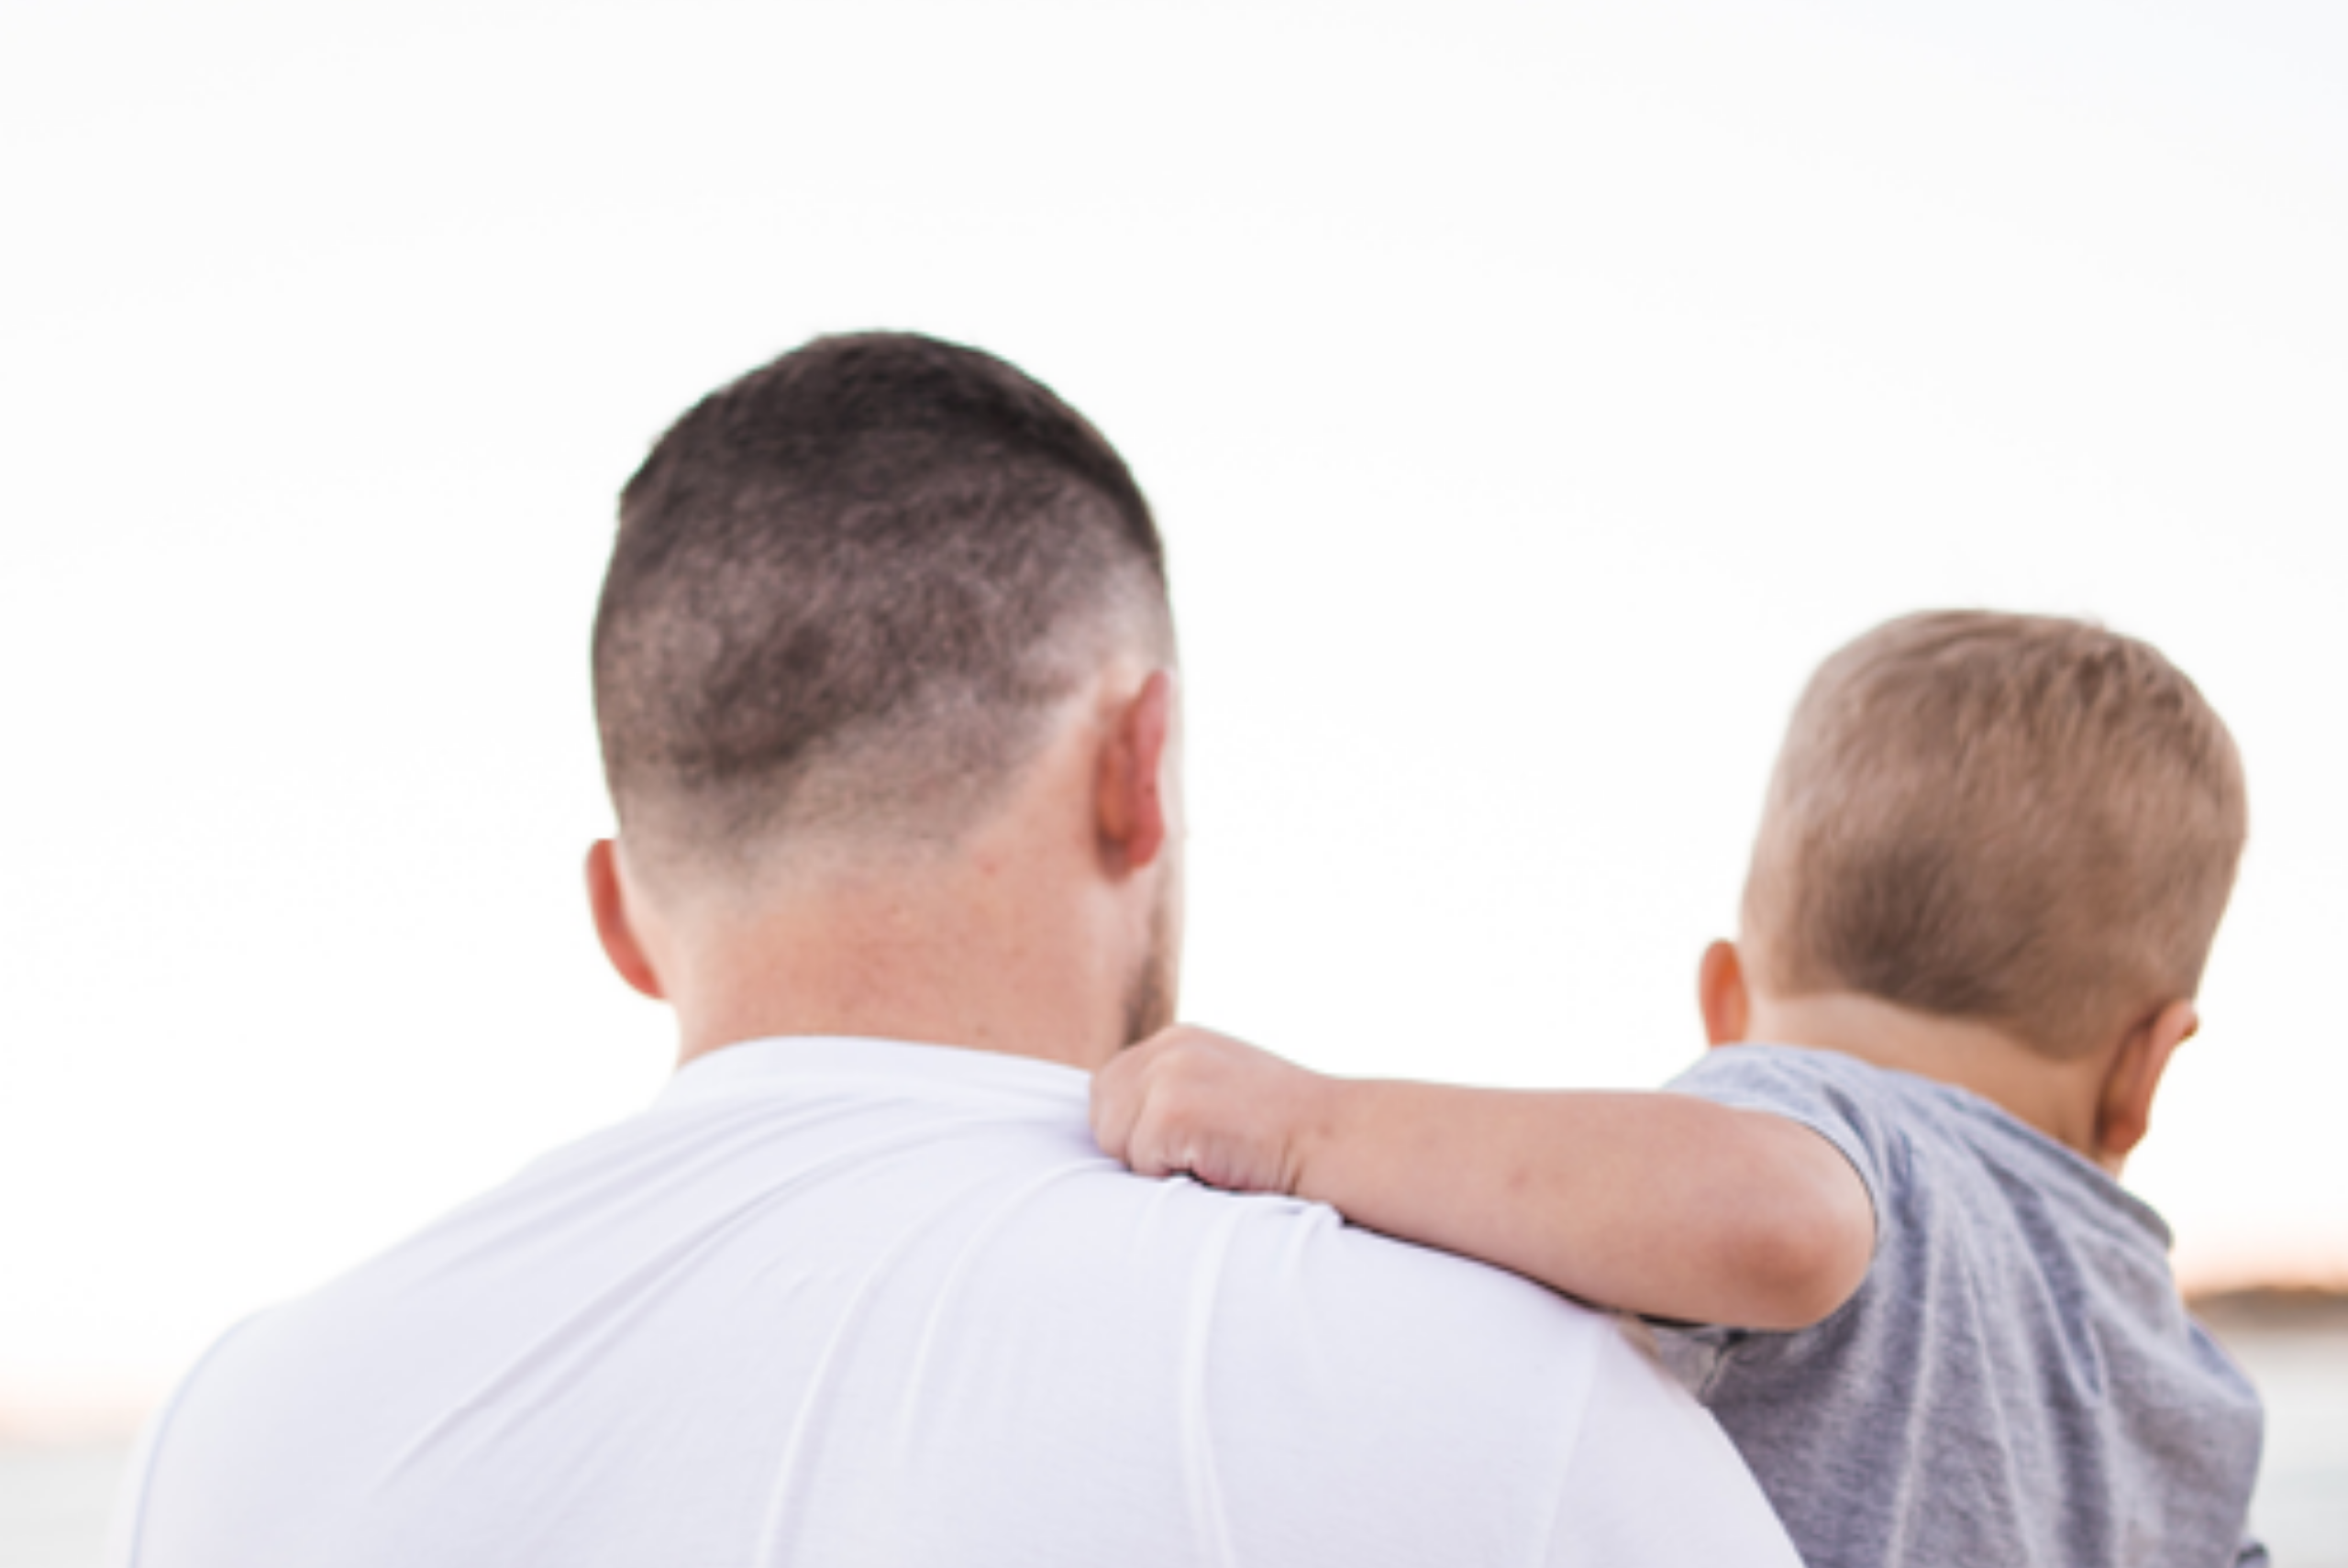 Blog 3 - Family Law Myth #2: I Have To Go To Court To Get Custody Over My Kids￼